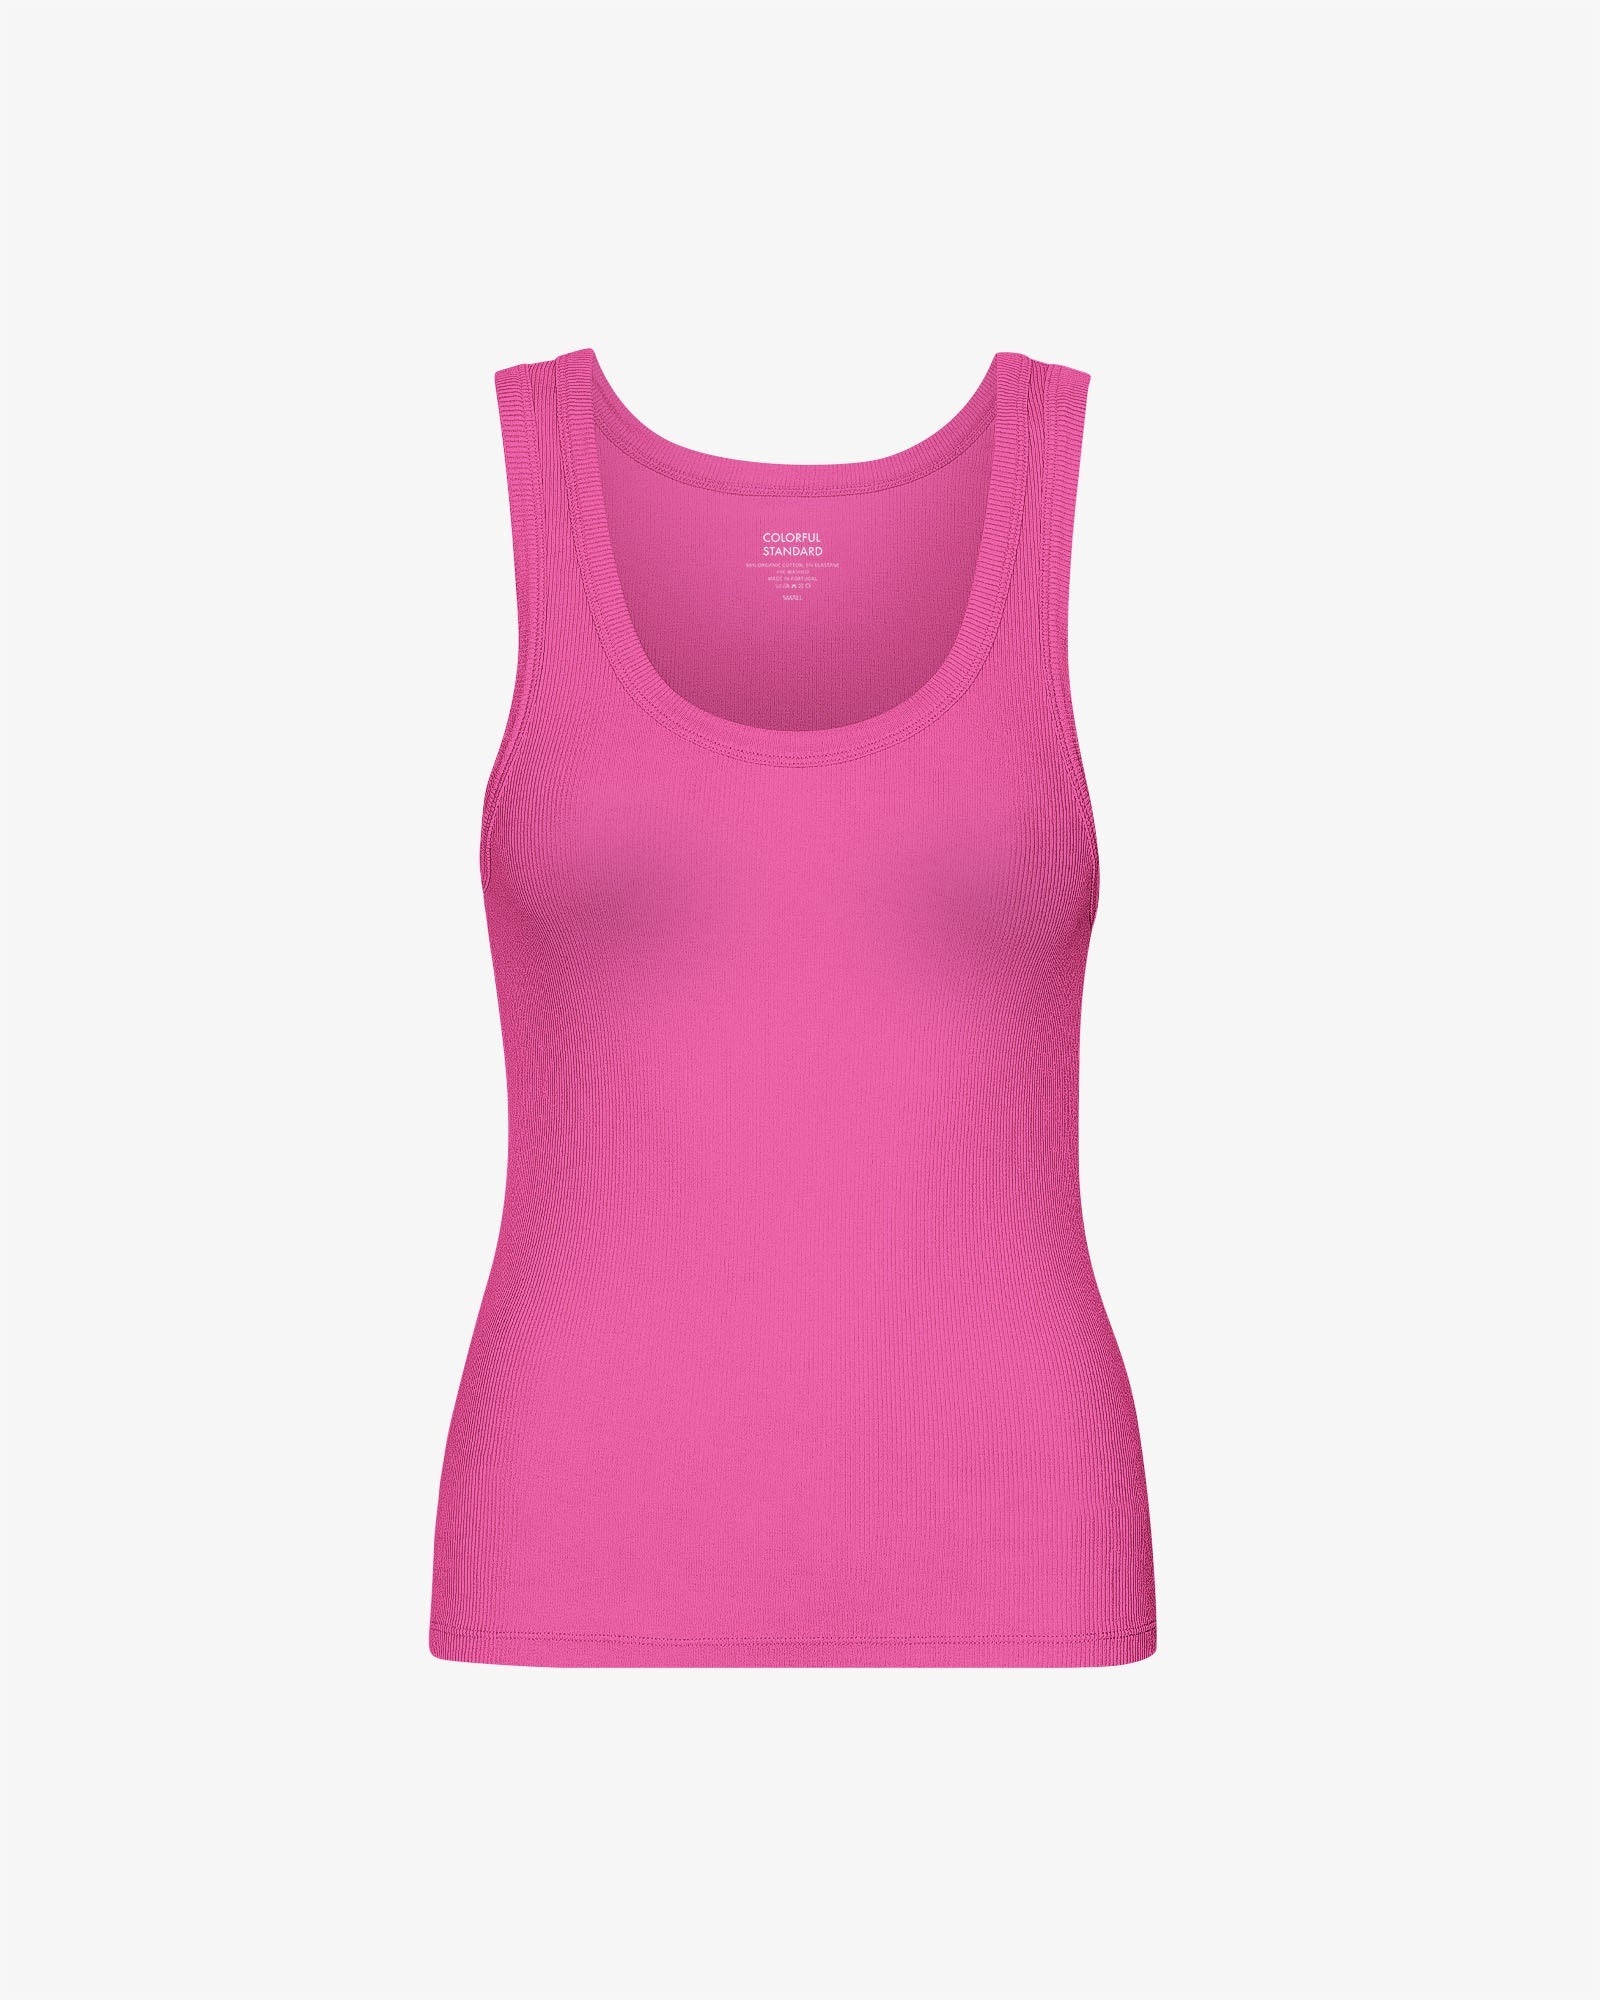 Pink Tank Tops for Women